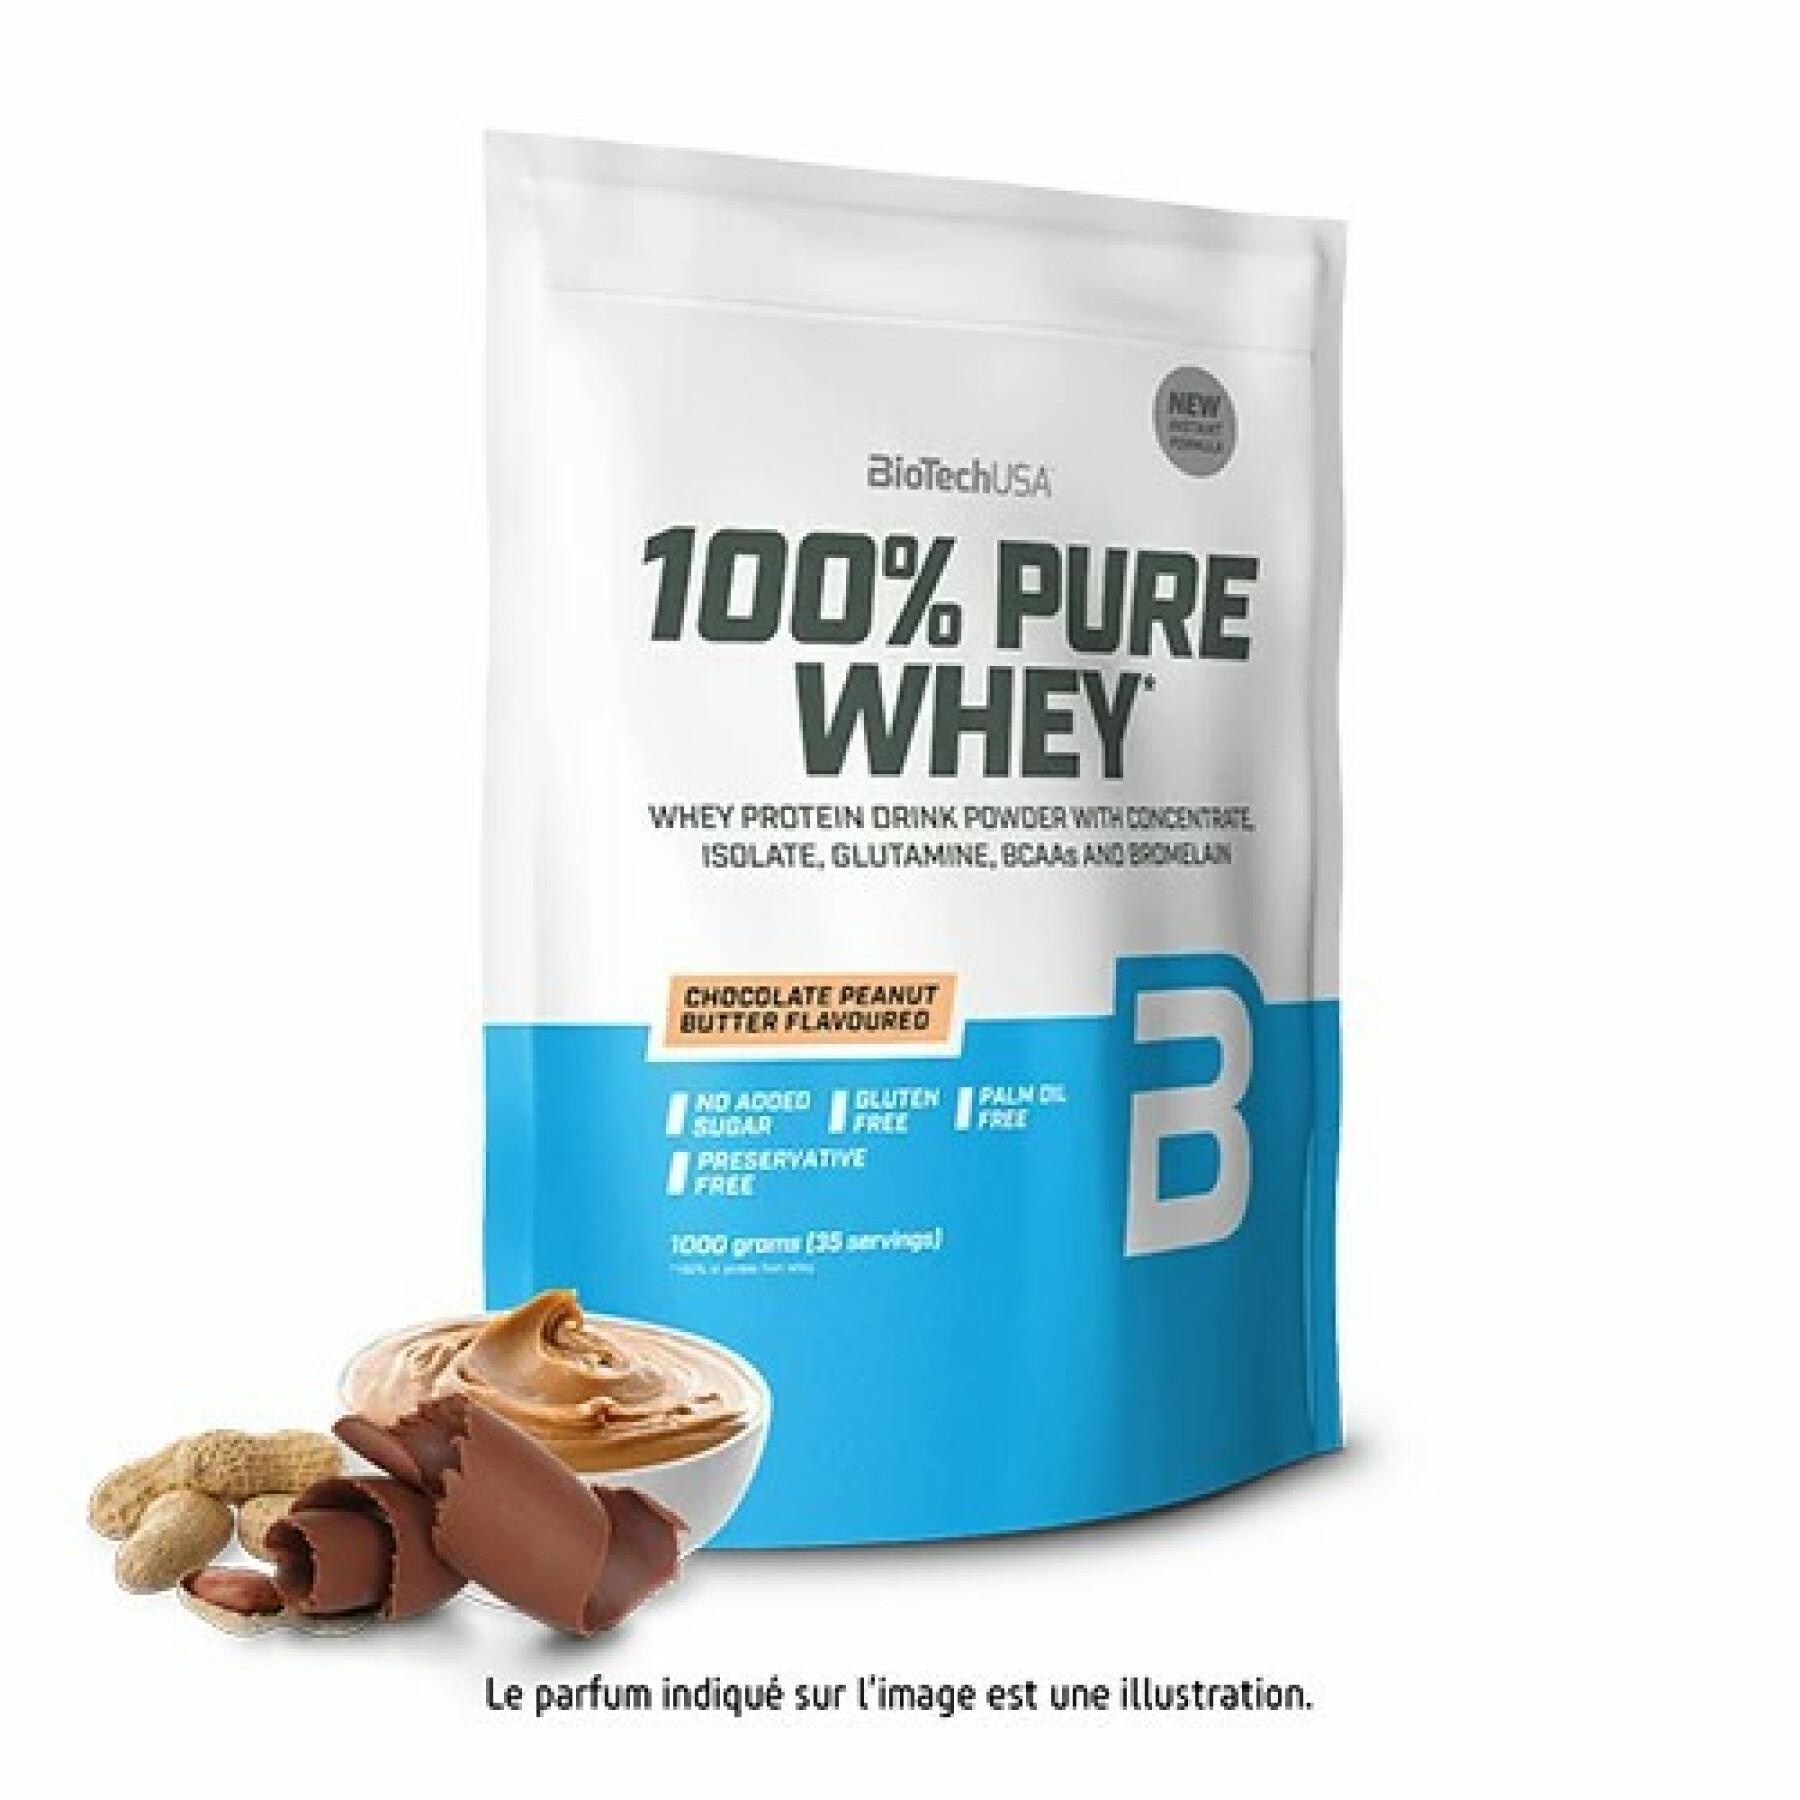 Lot of 10 bags of 100% pure whey protein Biotech USA - Caramel-cappuccino - 1kg